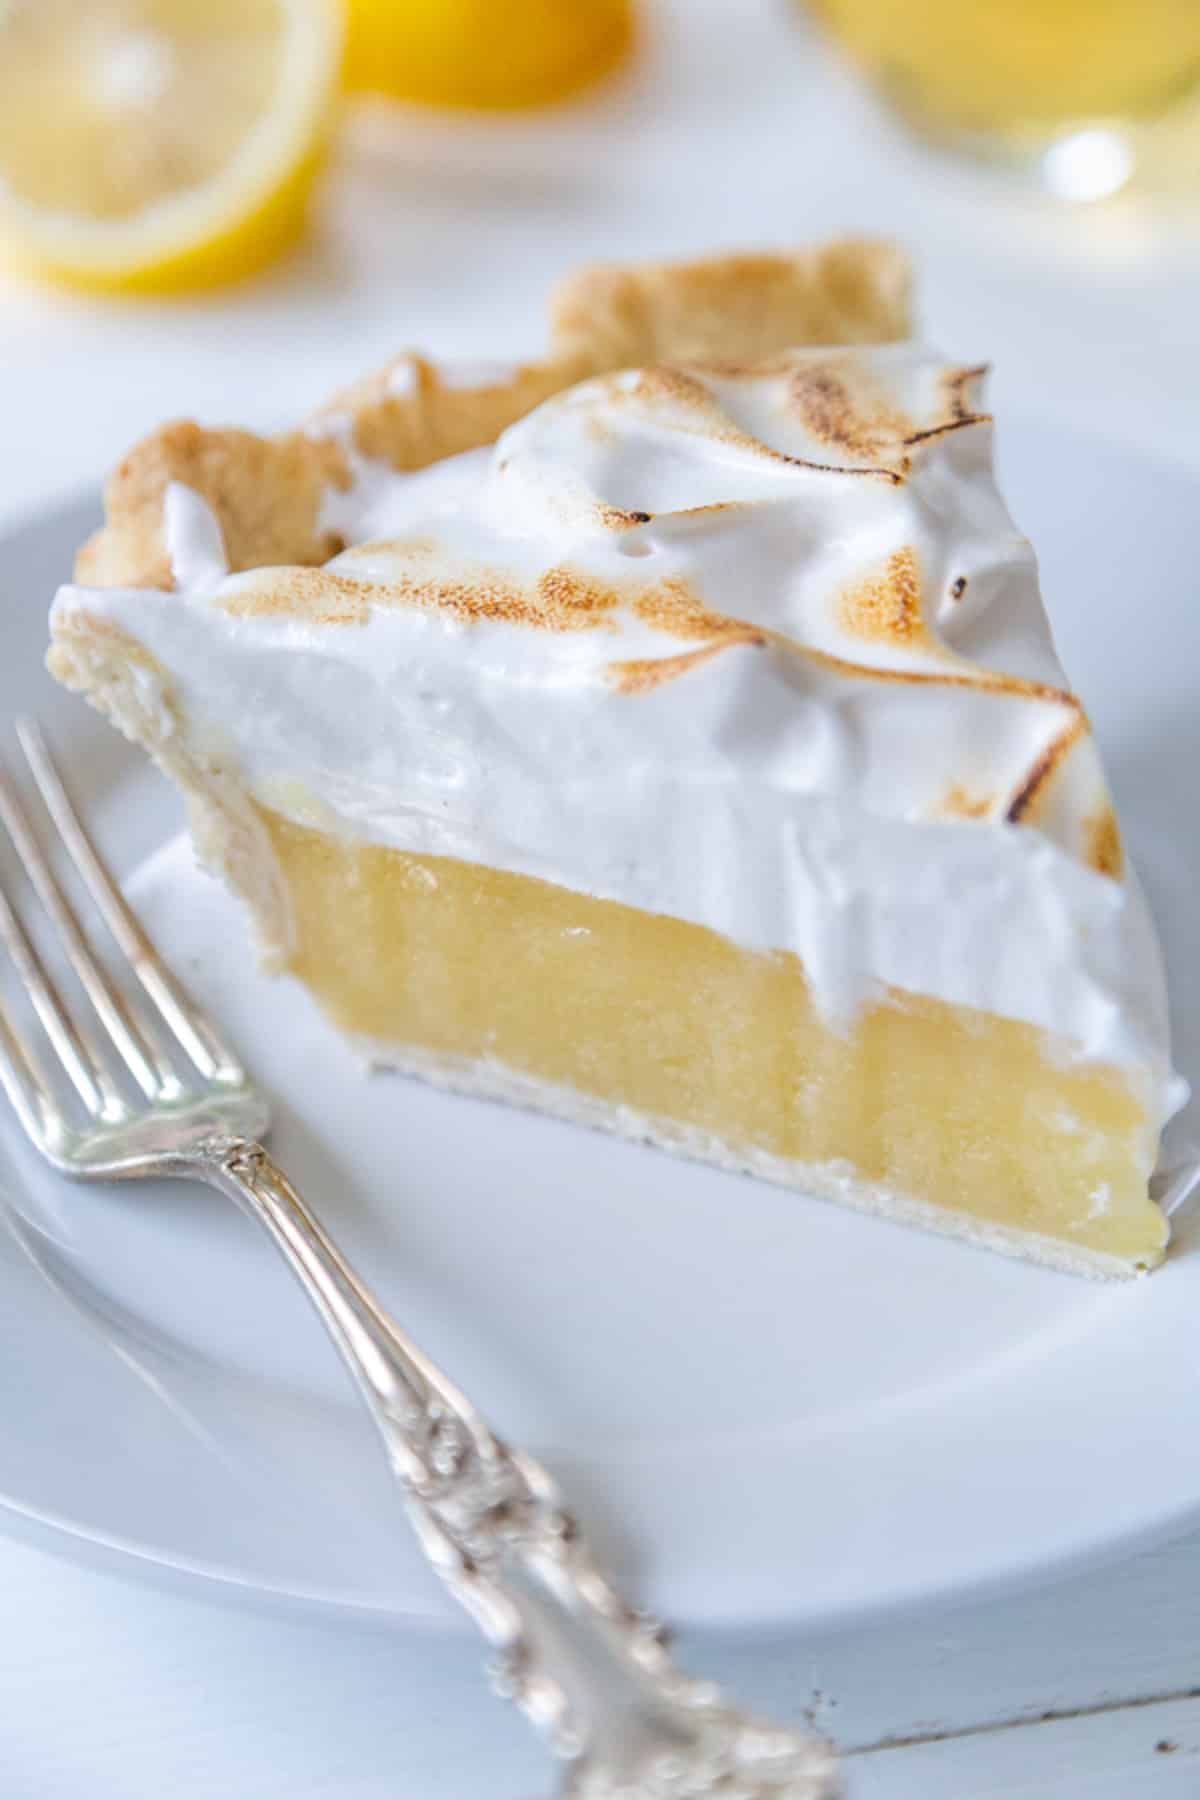 A slice of vegan lemon meringue pie on a white plate with a silver fork.